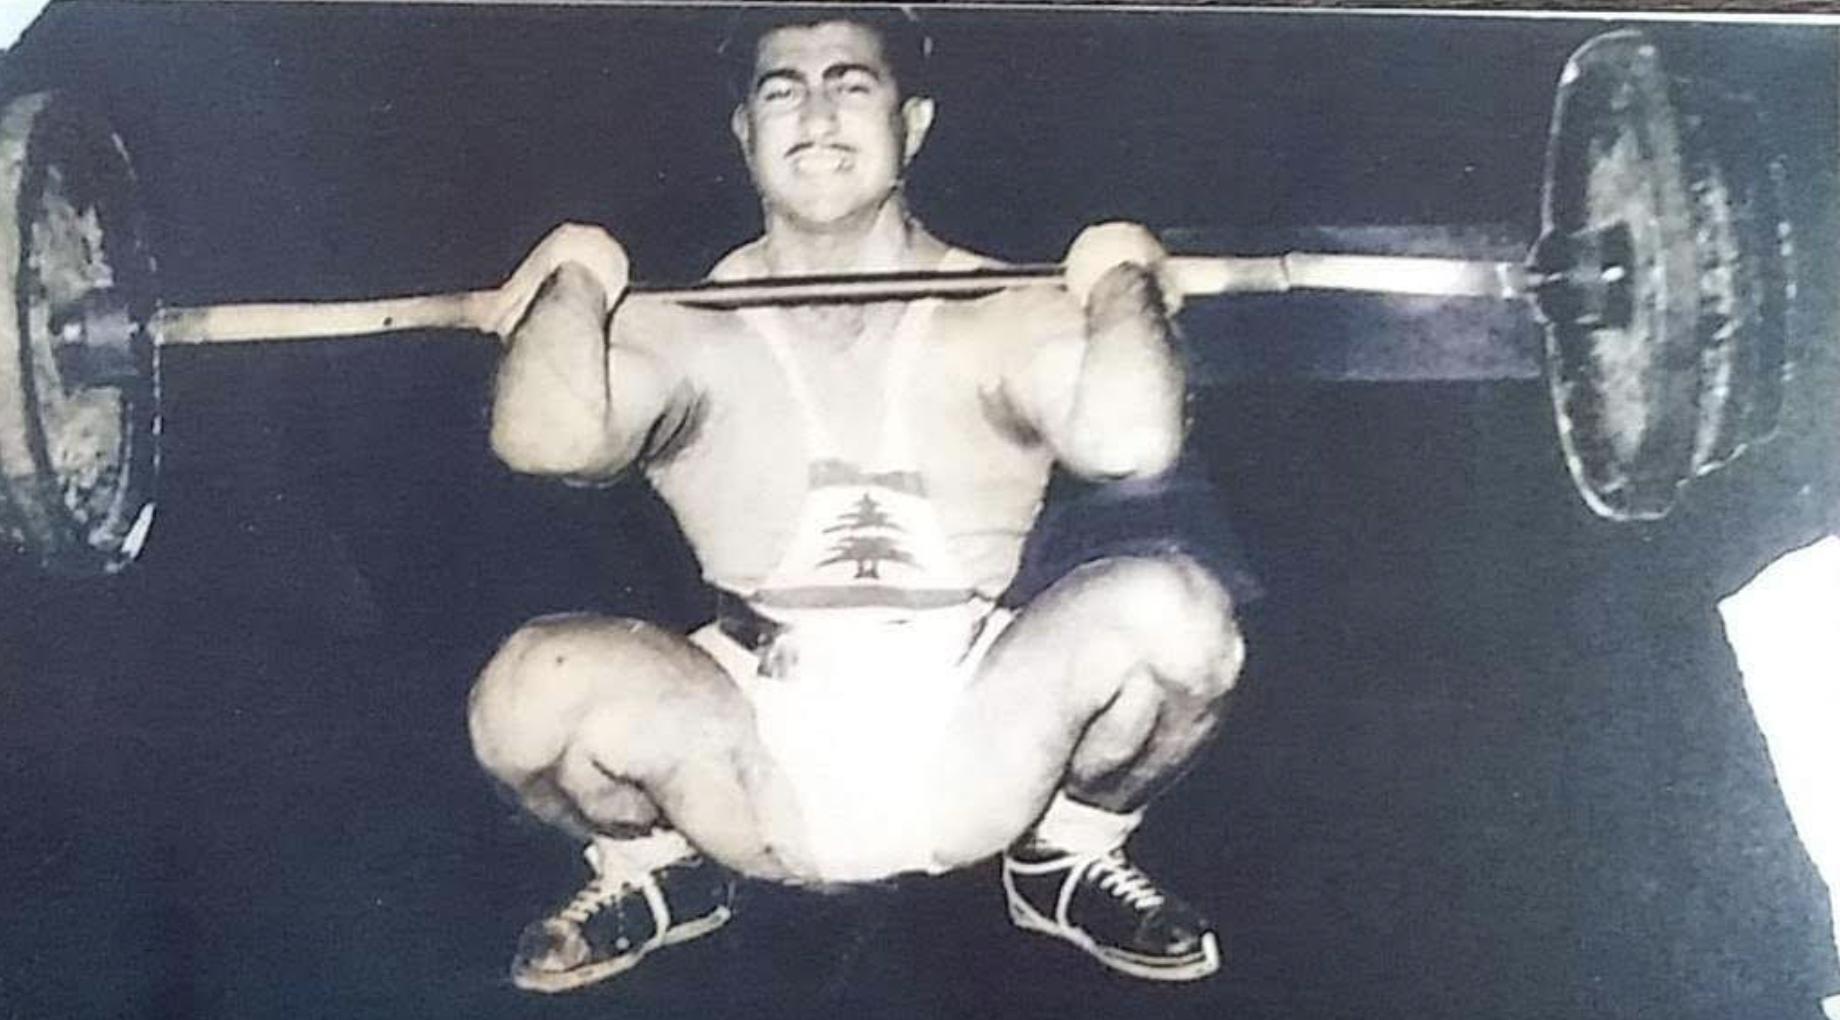 Tchobanian in Lebanon in 1958 on his way to making a career-high total of 345 kilograms ©ITG